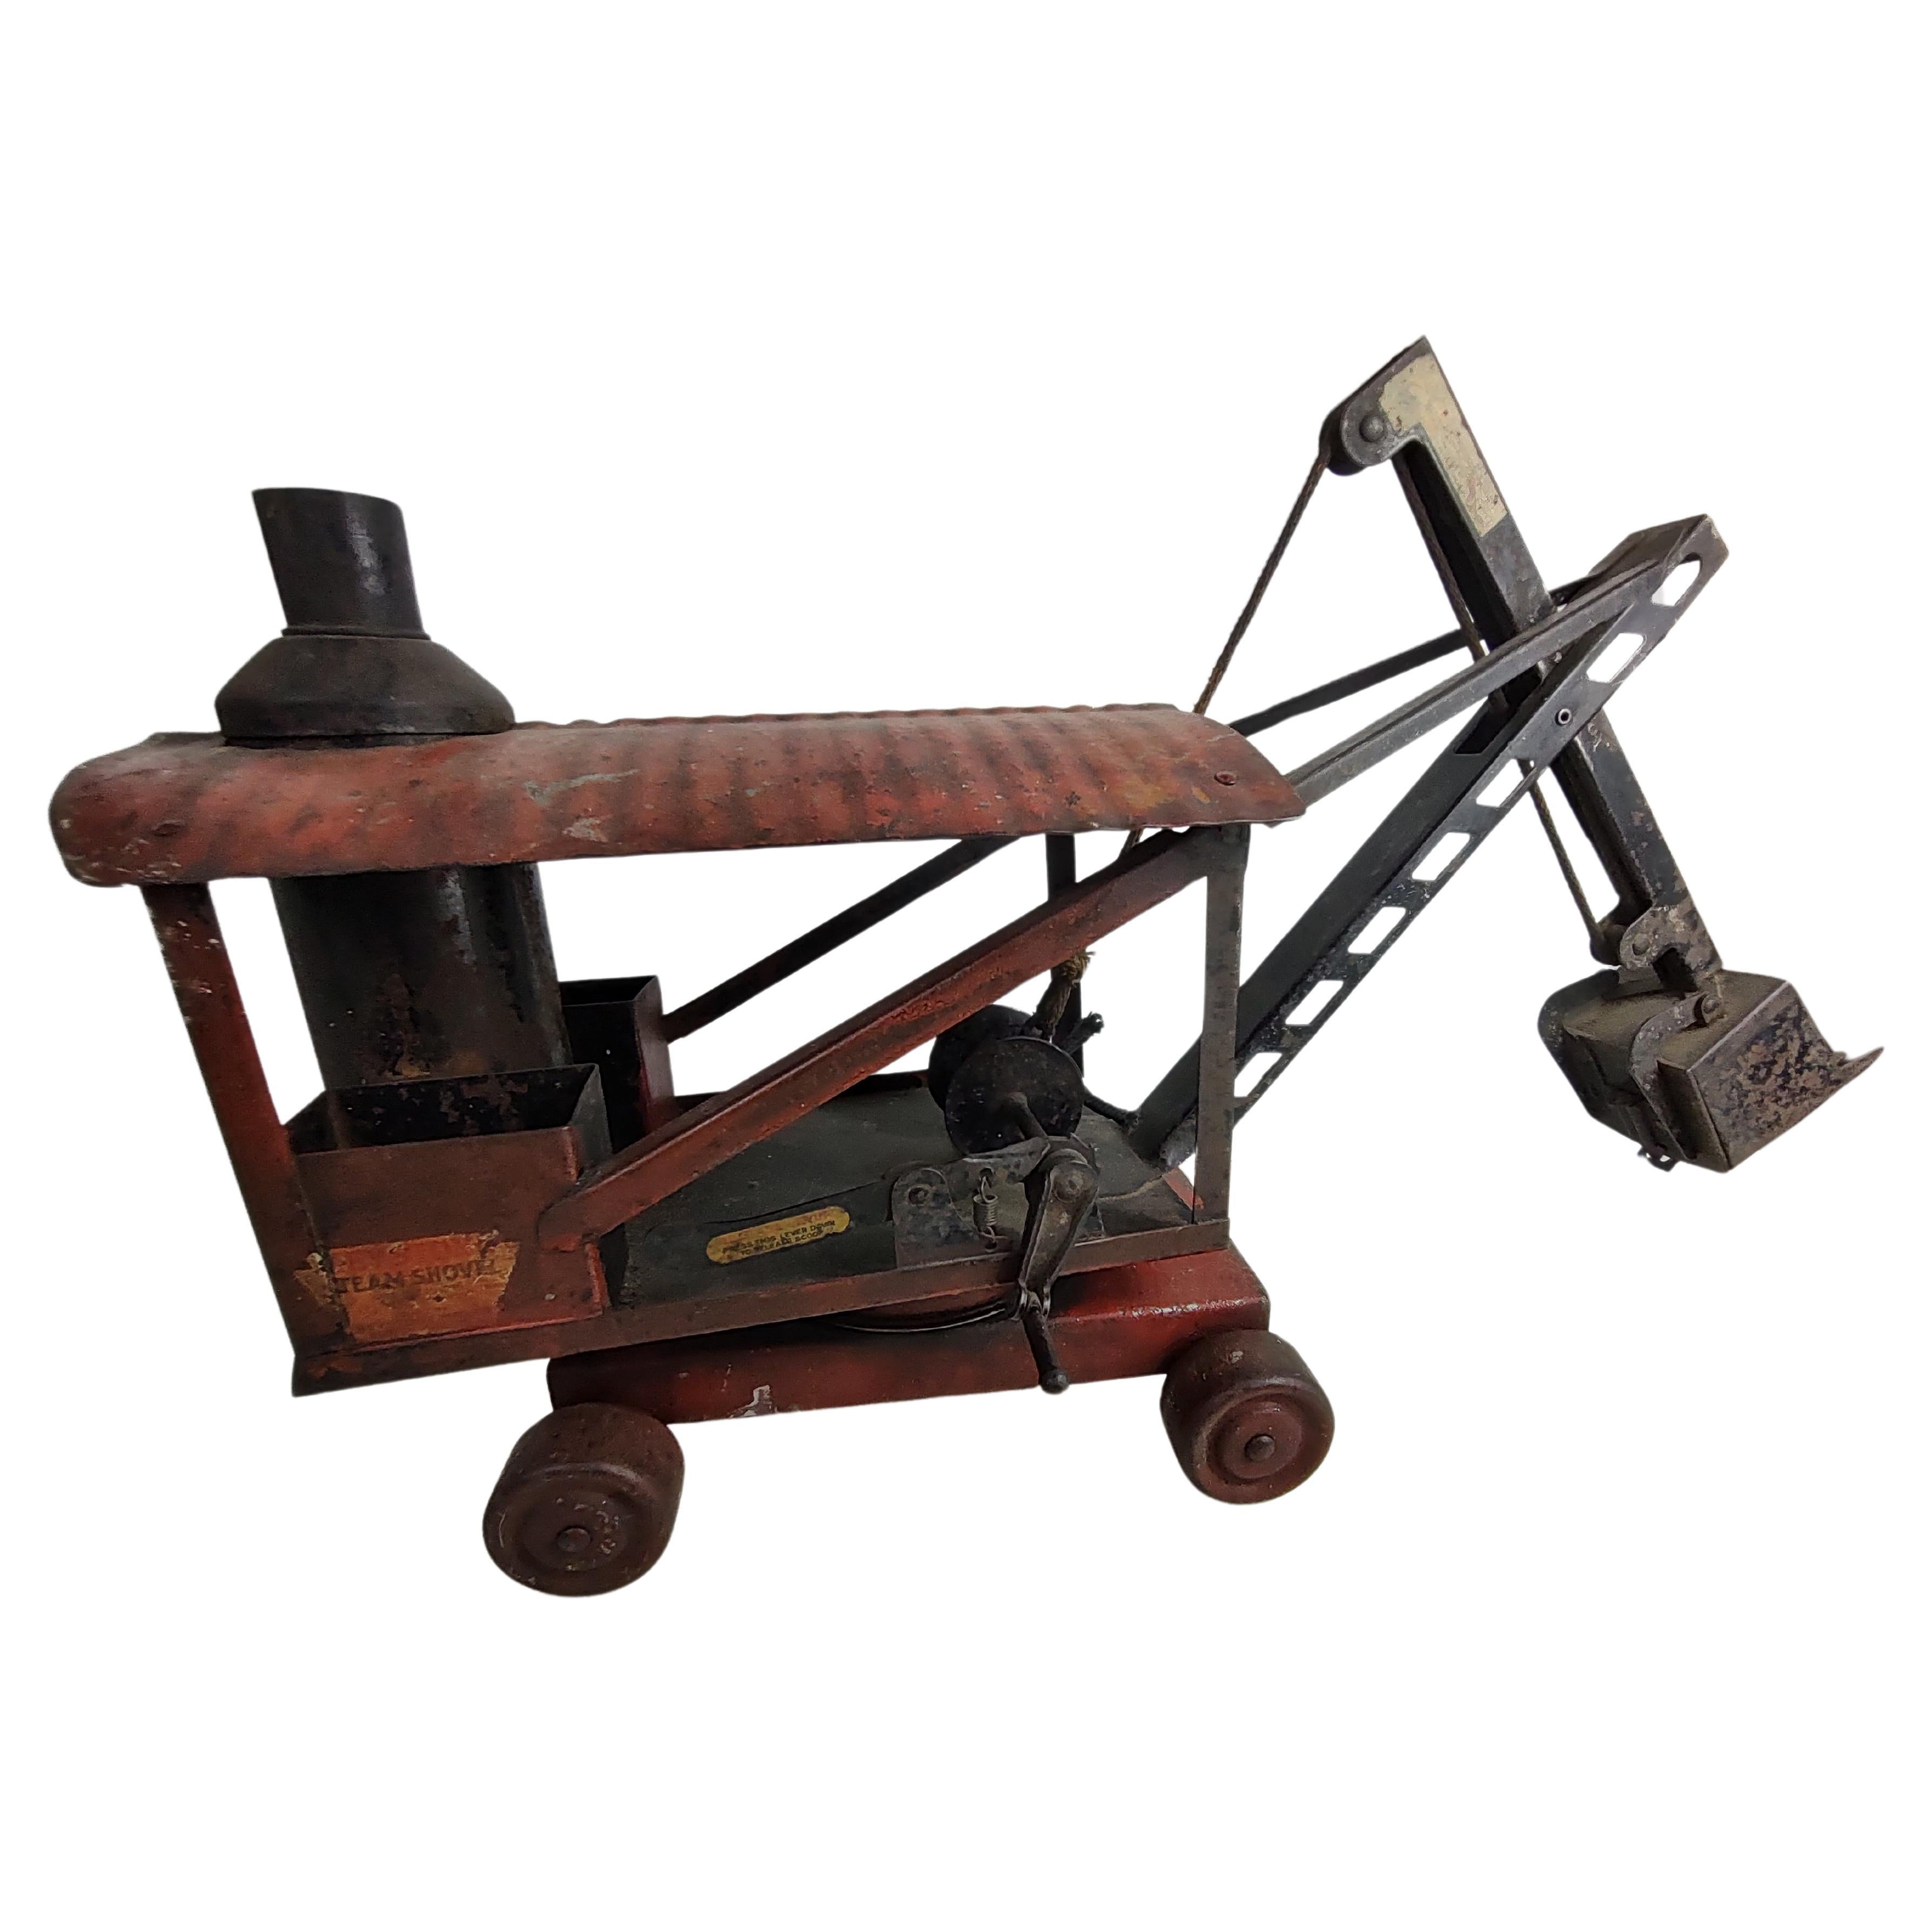 Early 20th Century Keystone Pressed Steel Toy Steam Shovel For Sale